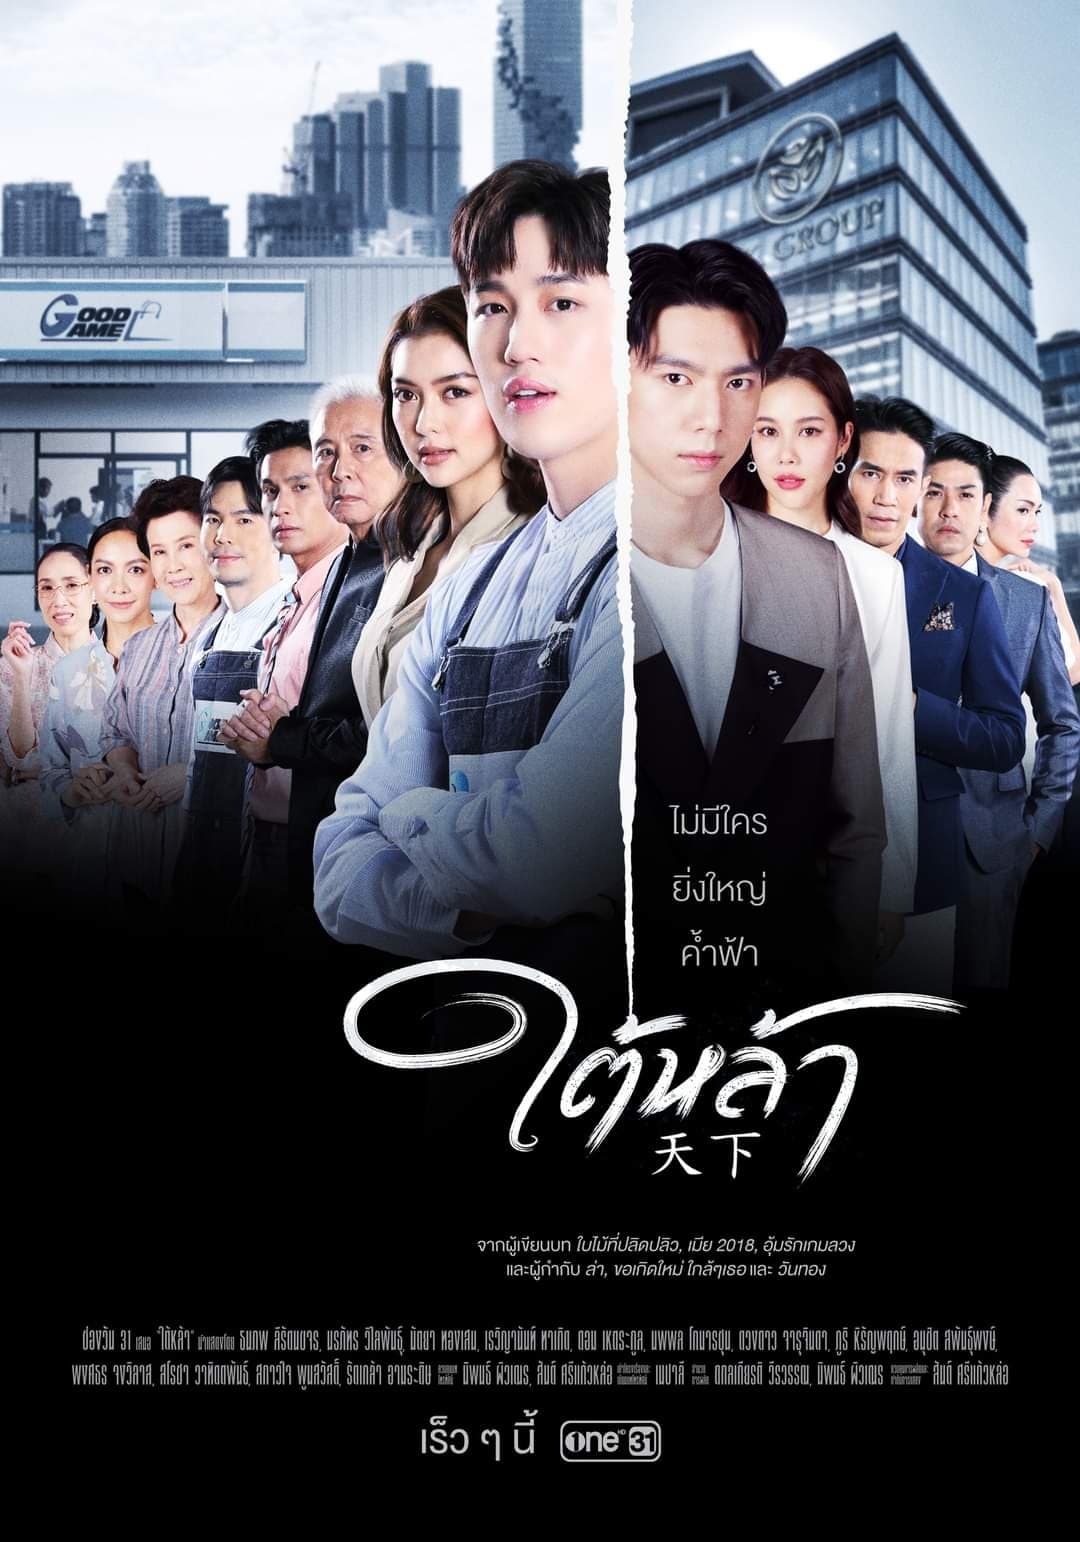 TV ratings for The Giver (ใต้หล้า) in South Korea. One31 TV series